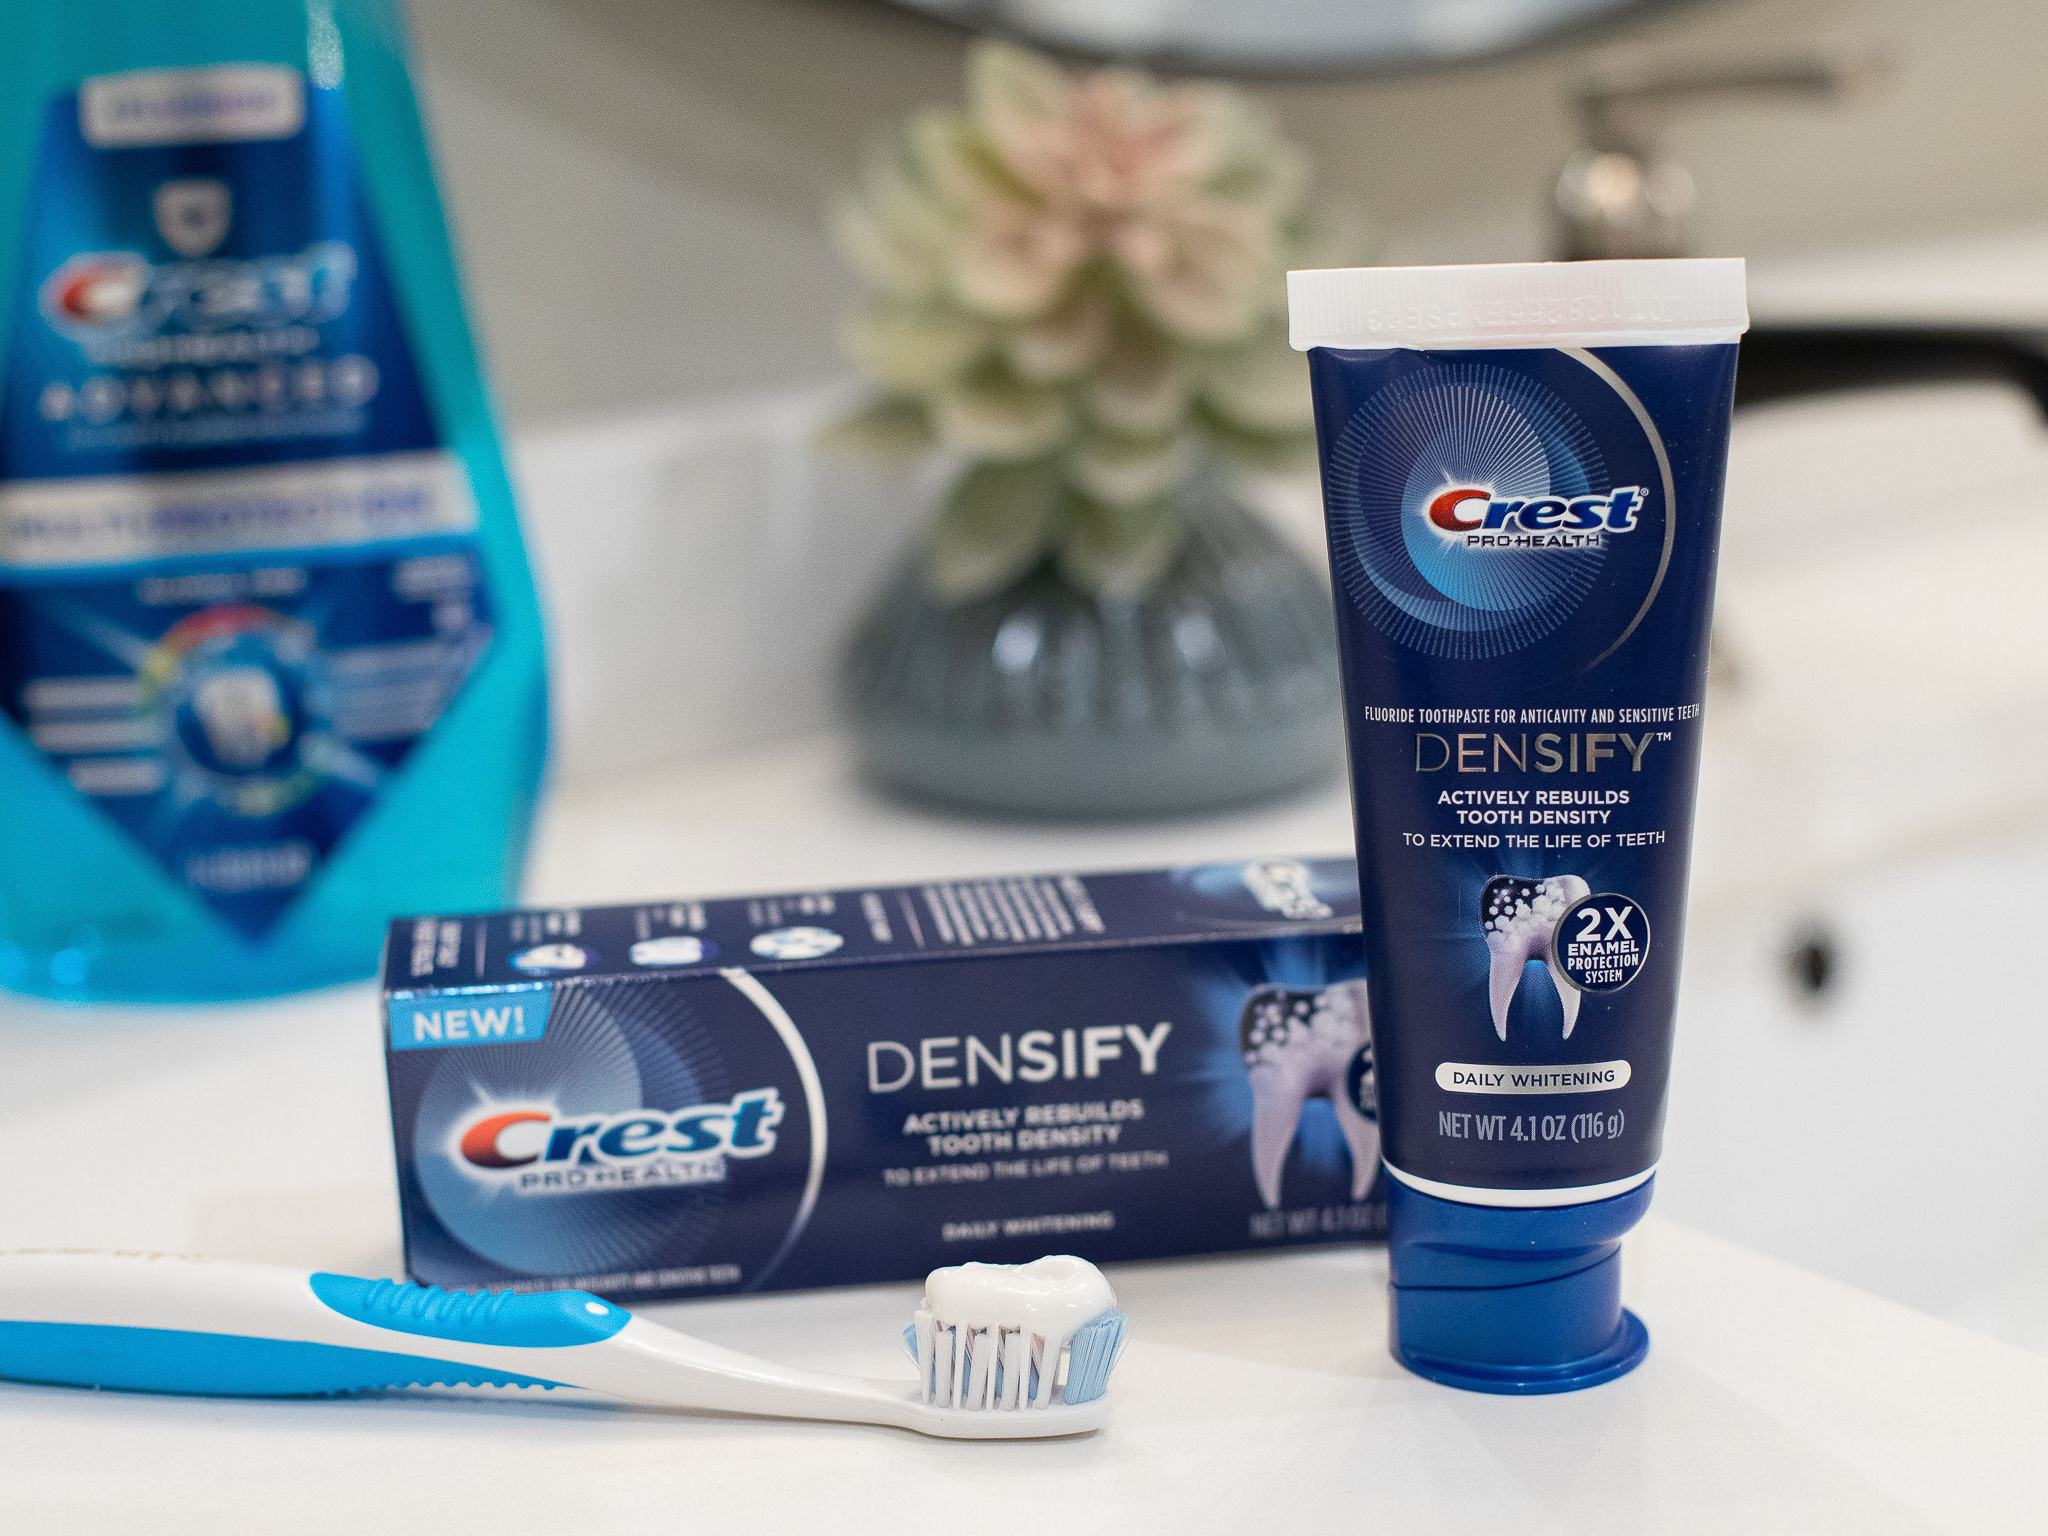 Crest Pro-Health Densify As Low As $3.19 At Publix (Regular Price $7.69) – Plus $2 Colgate Toothpaste